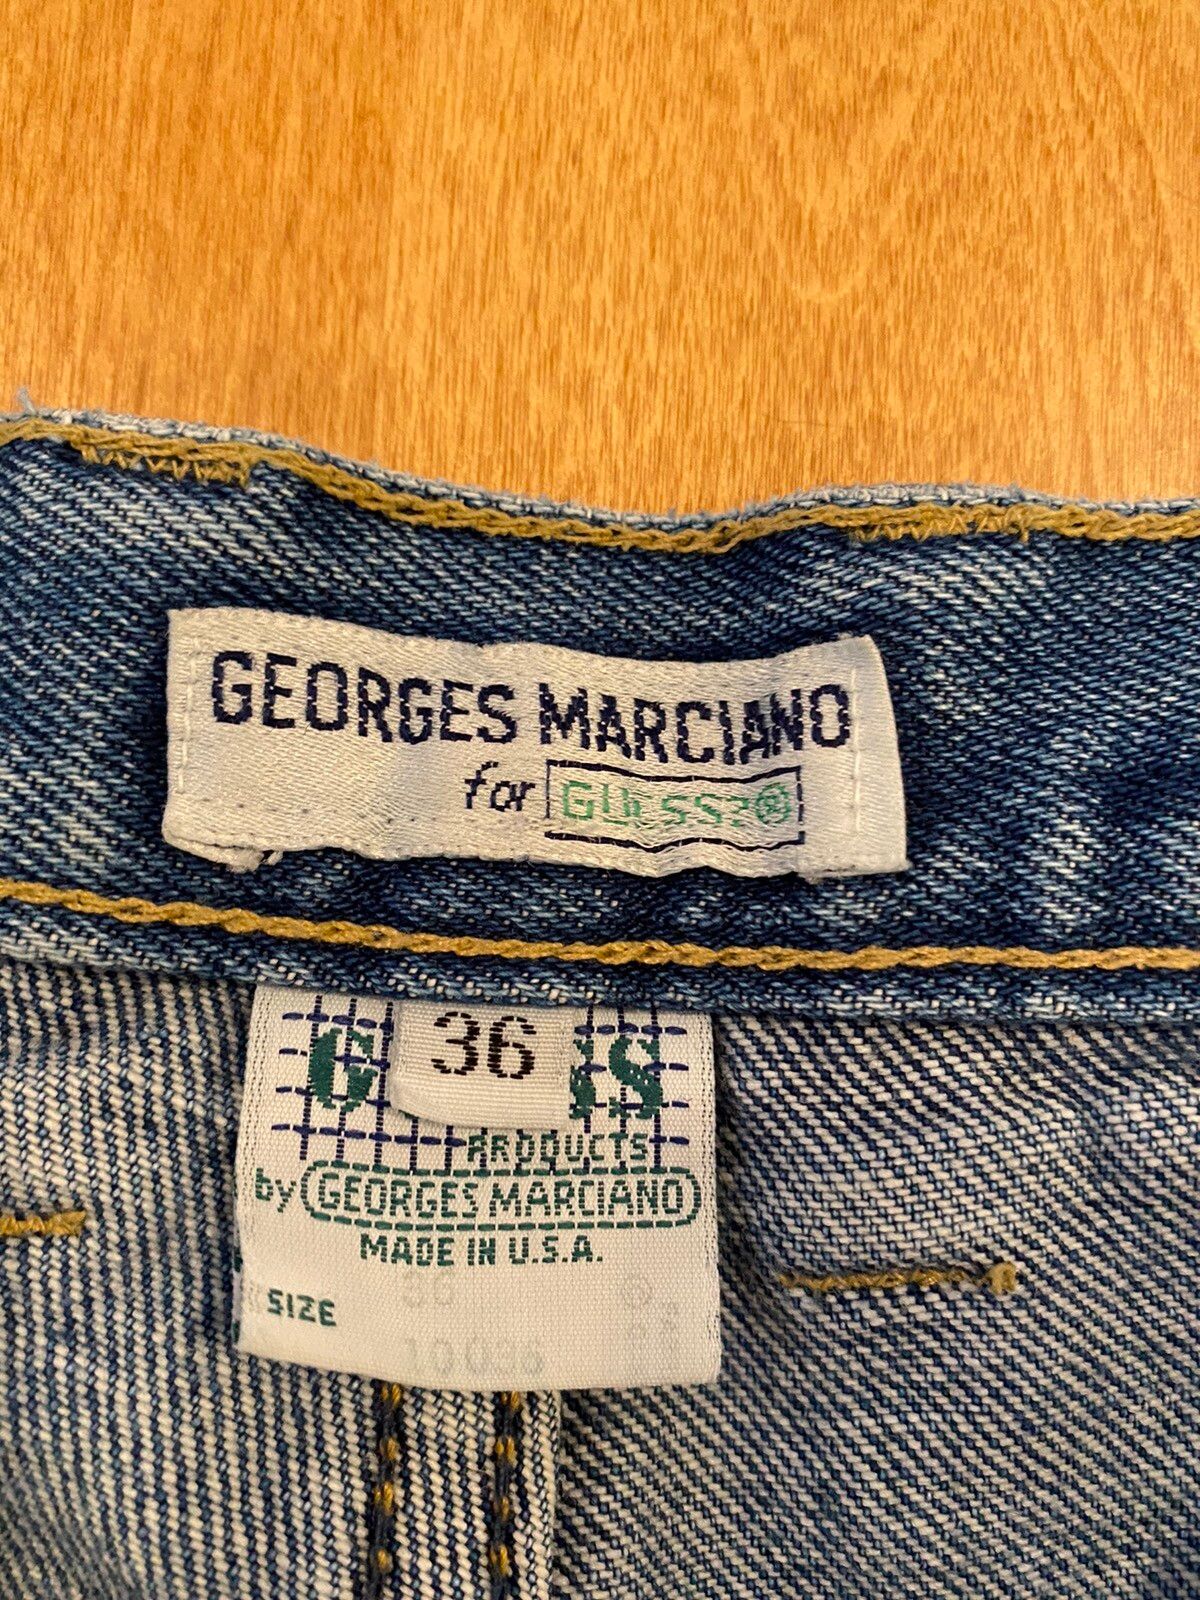 Guess Georges Marciano for guess denim Size US 36 / EU 52 - 4 Preview